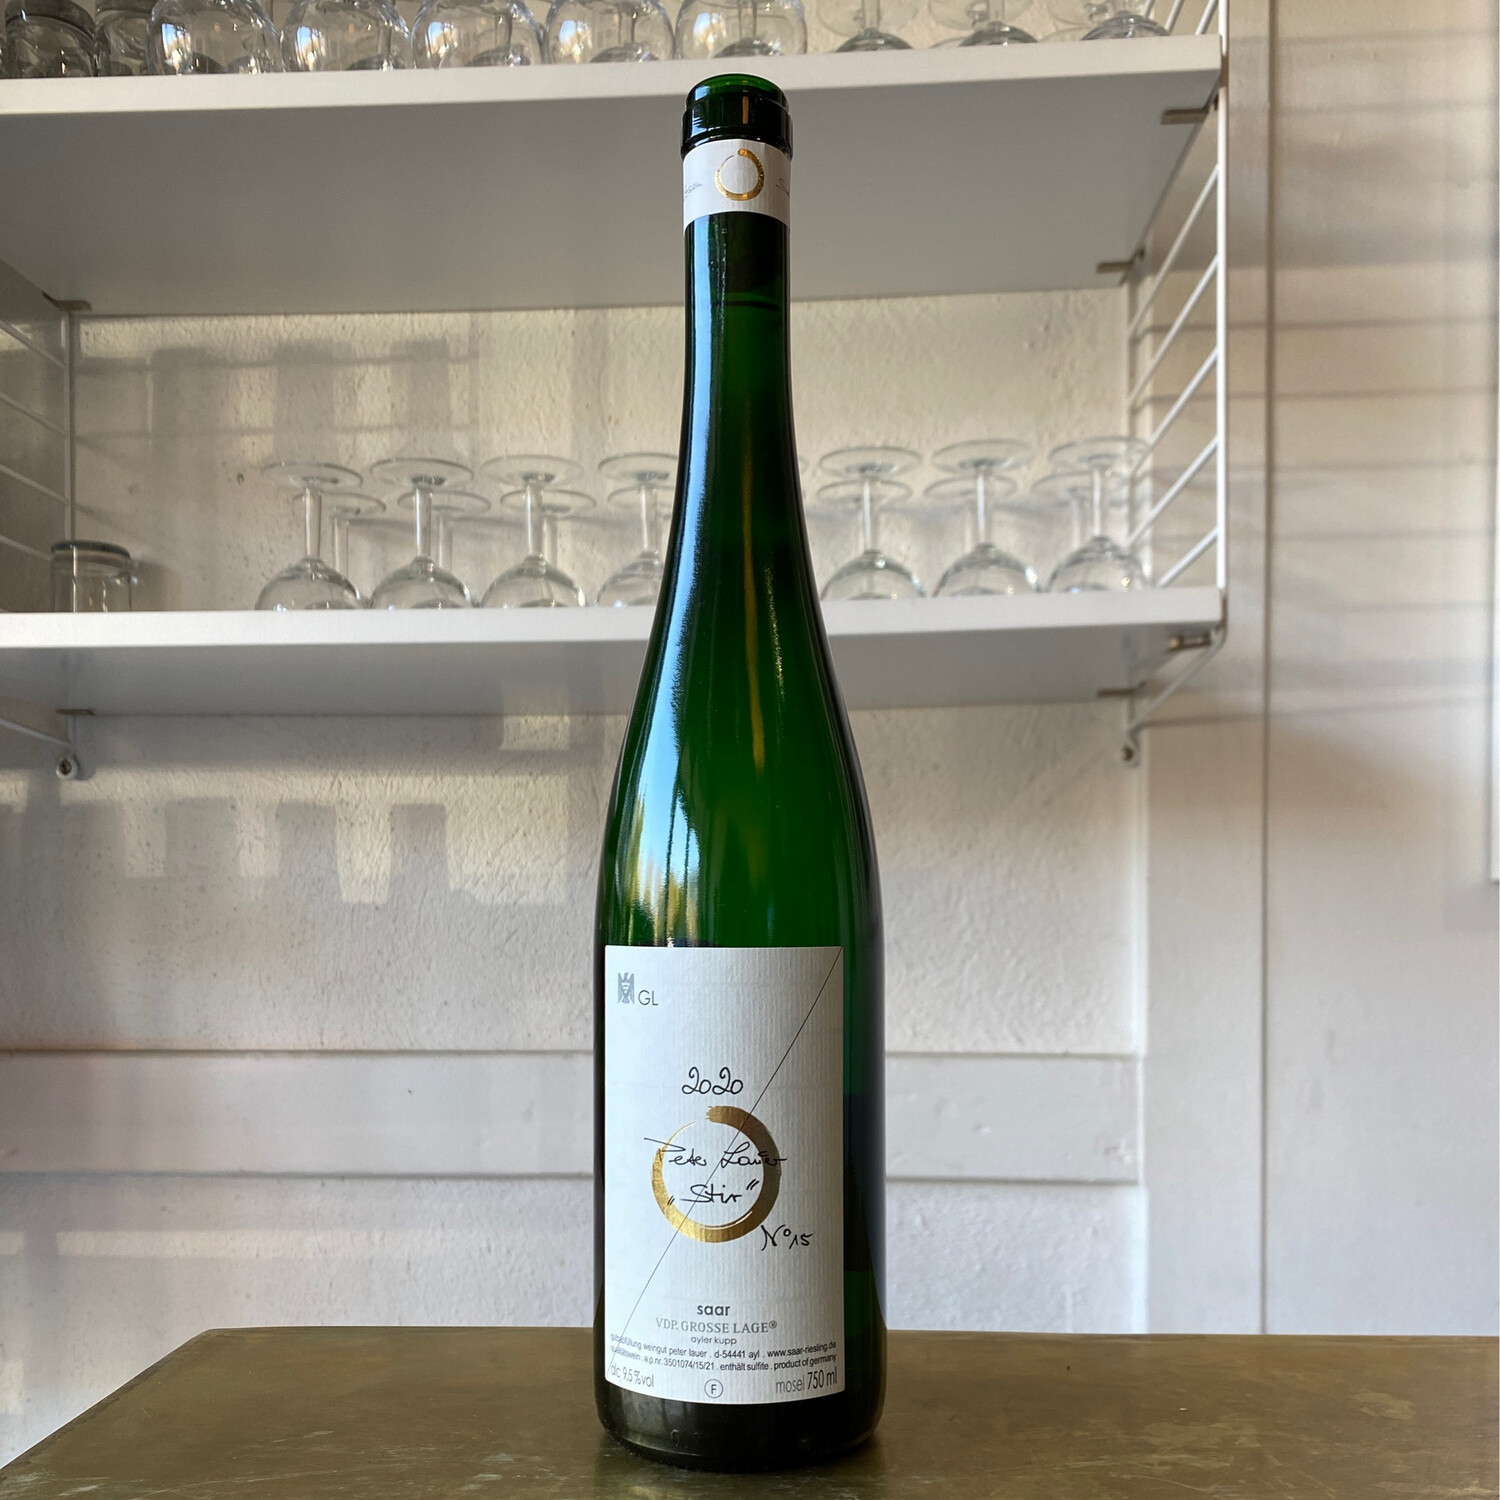 Peter Lauer, Riesling Stirn Fass 15 (2020)